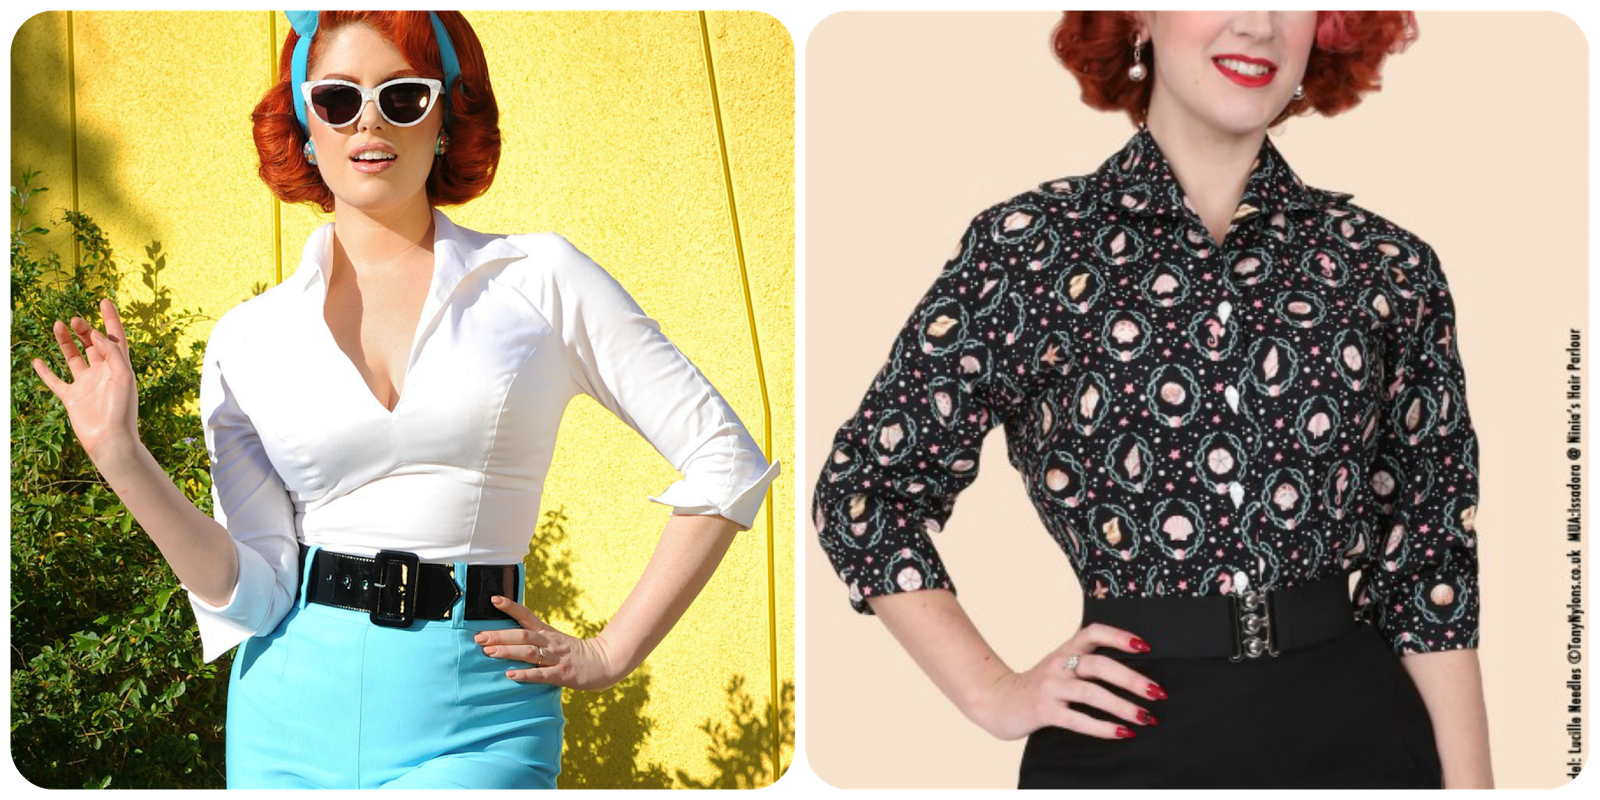 The British Belles: The Professional Pinup - Vintage in the Workplace